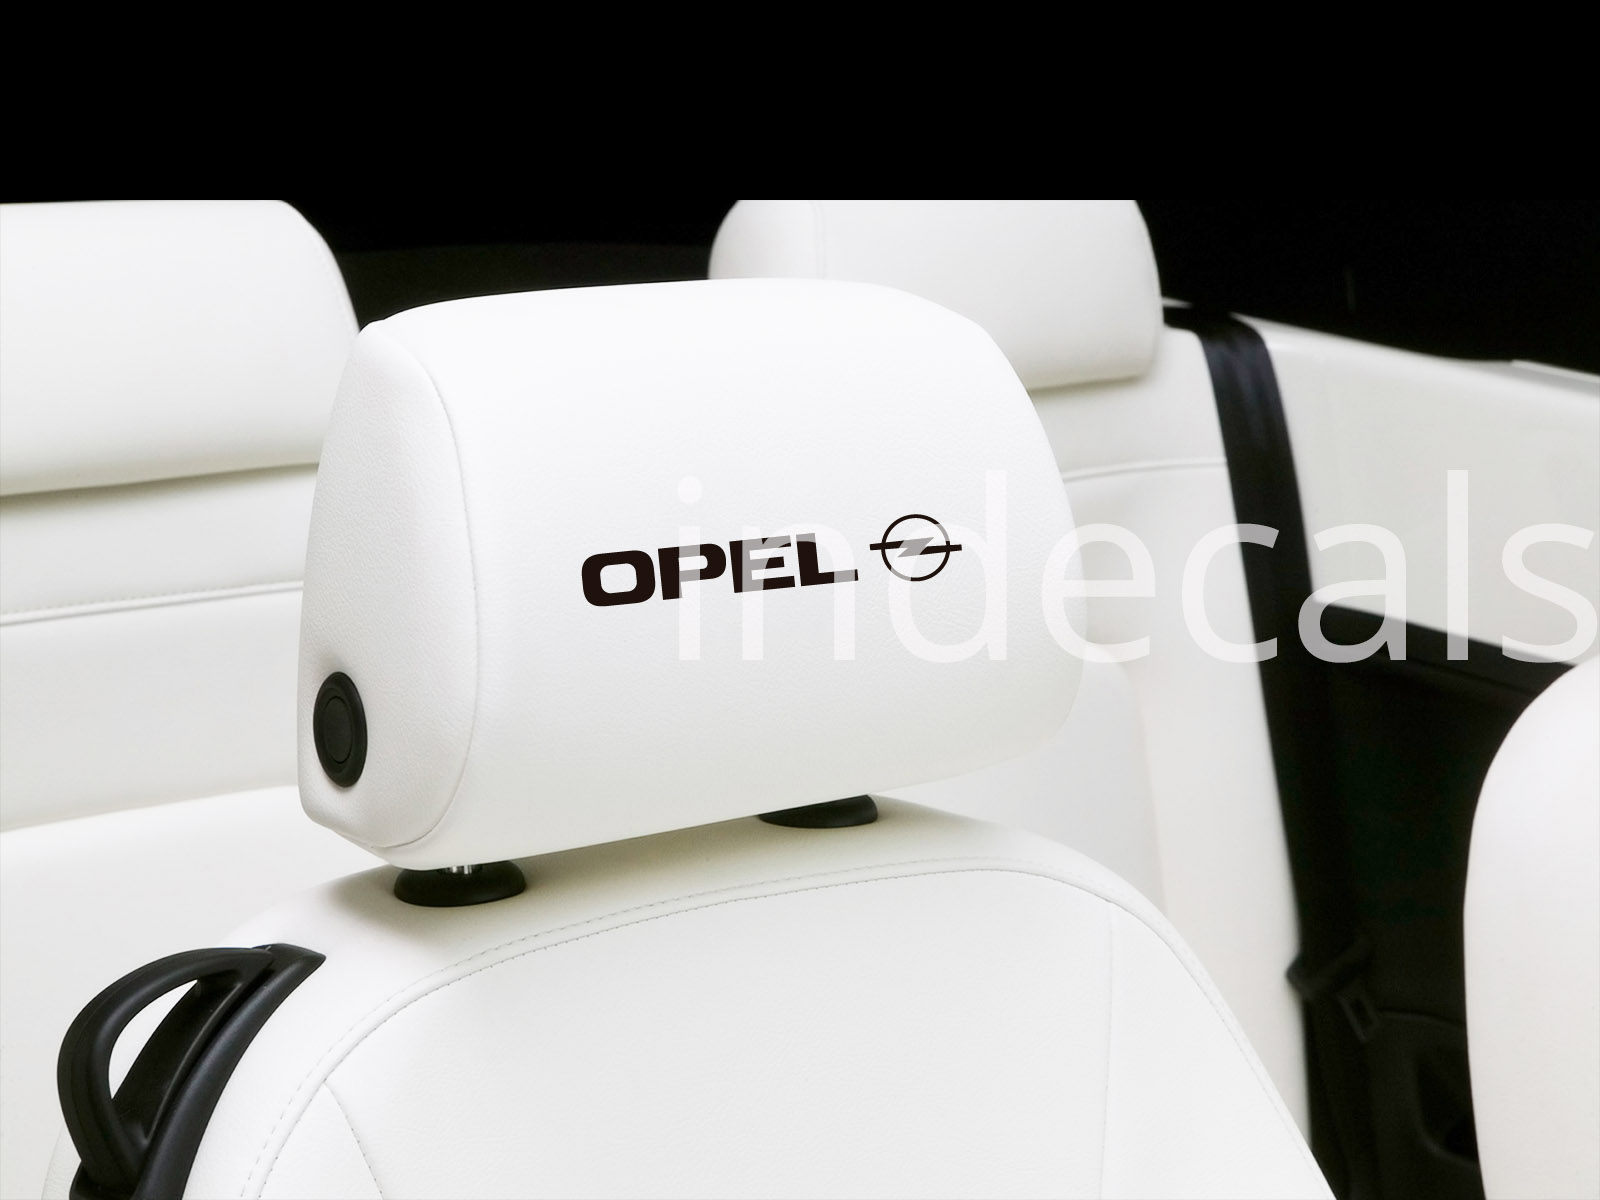 6 x Opel Stickers for Headrests - Black